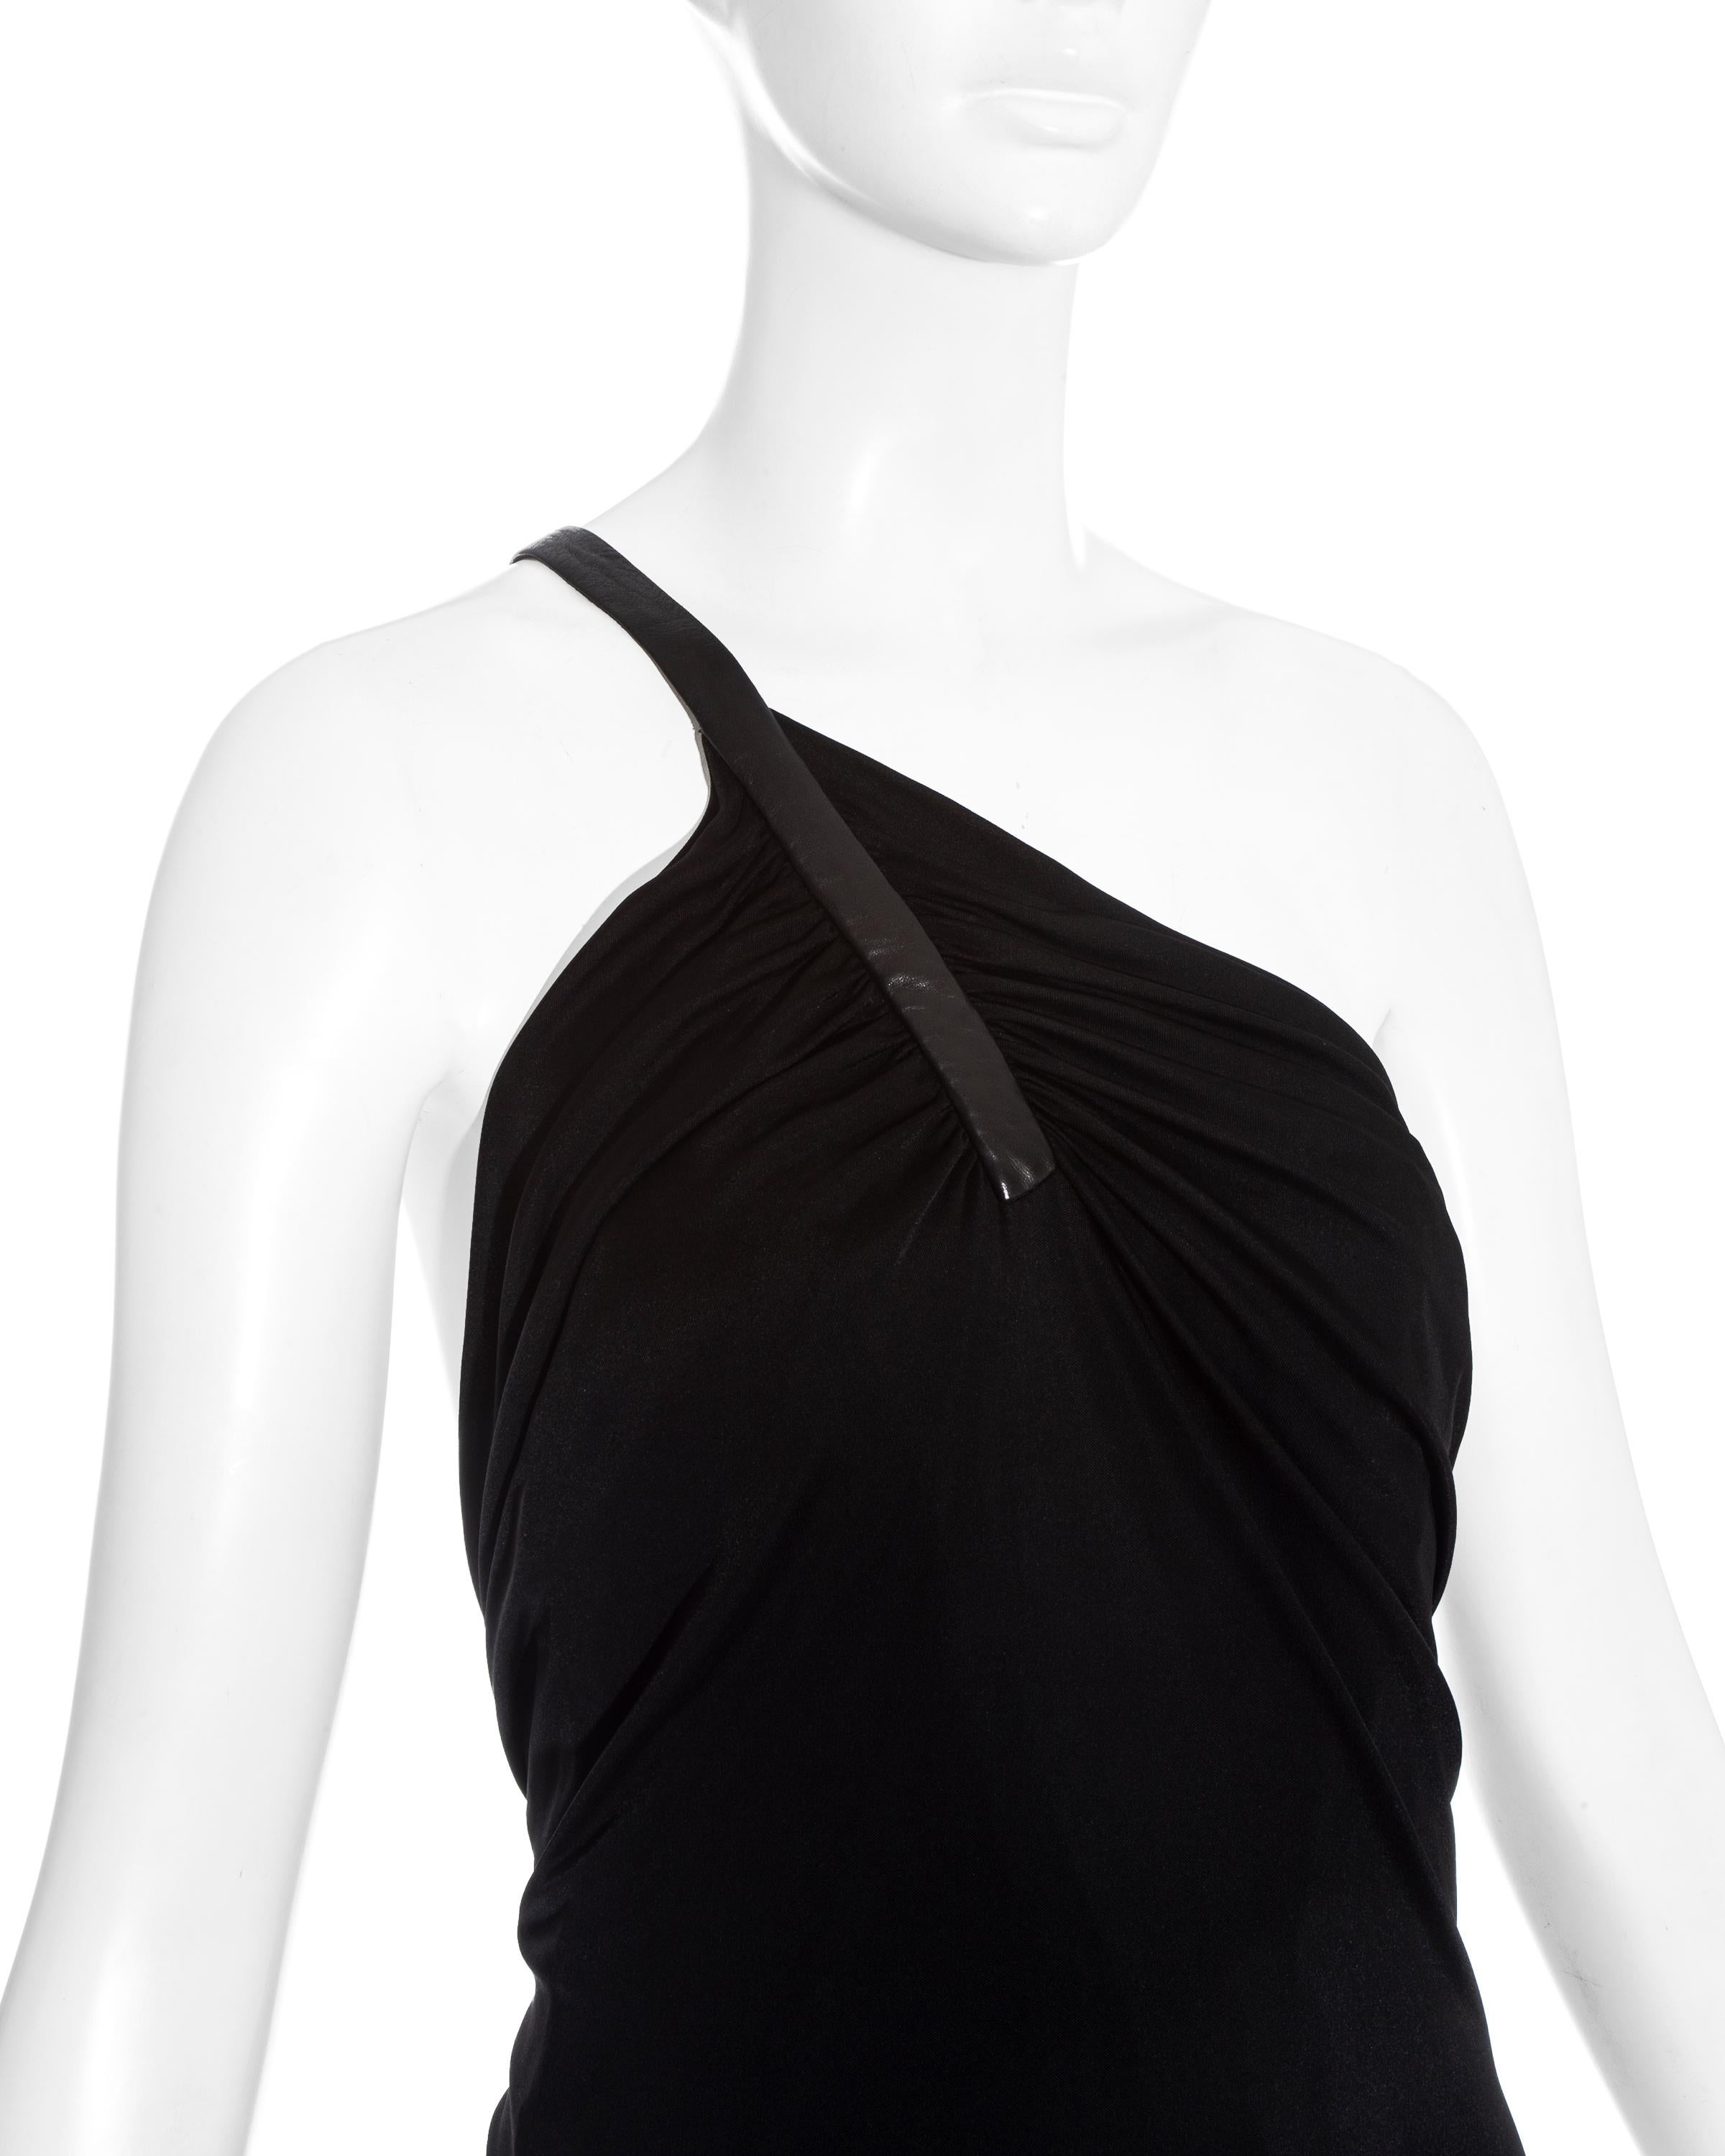 Gianni Versace black evening dress with leather strap ss 2001 For Sale 1